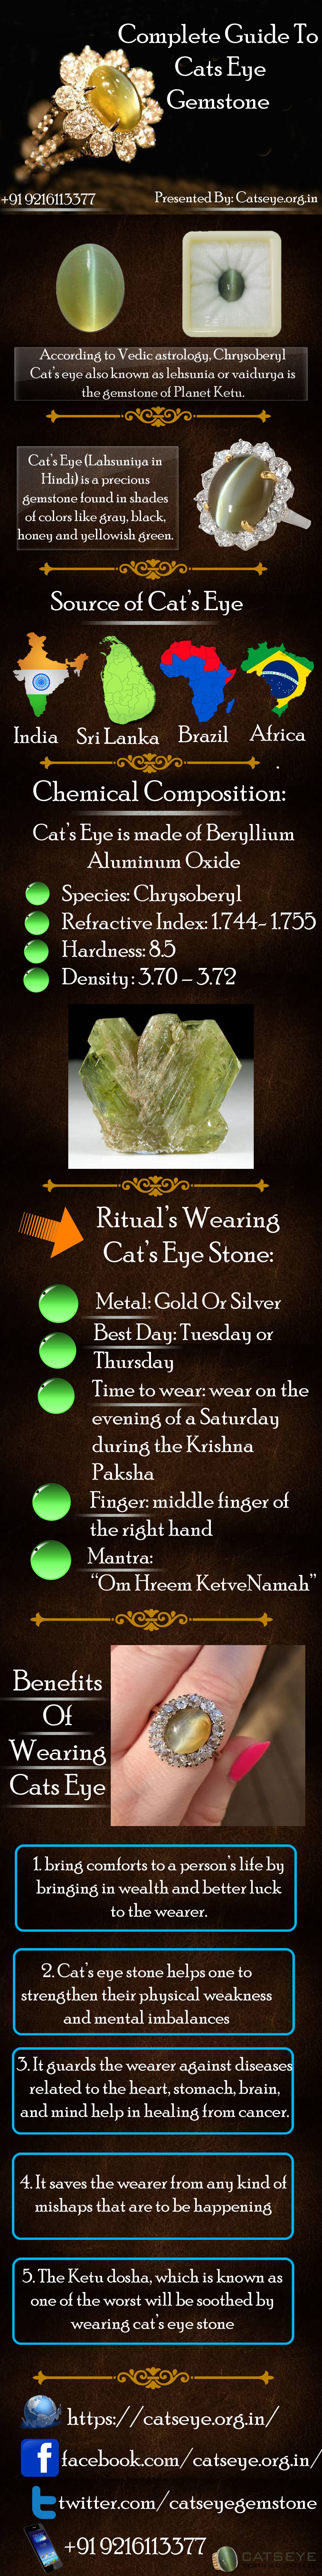 Know Something About Cats Eye Gemstone